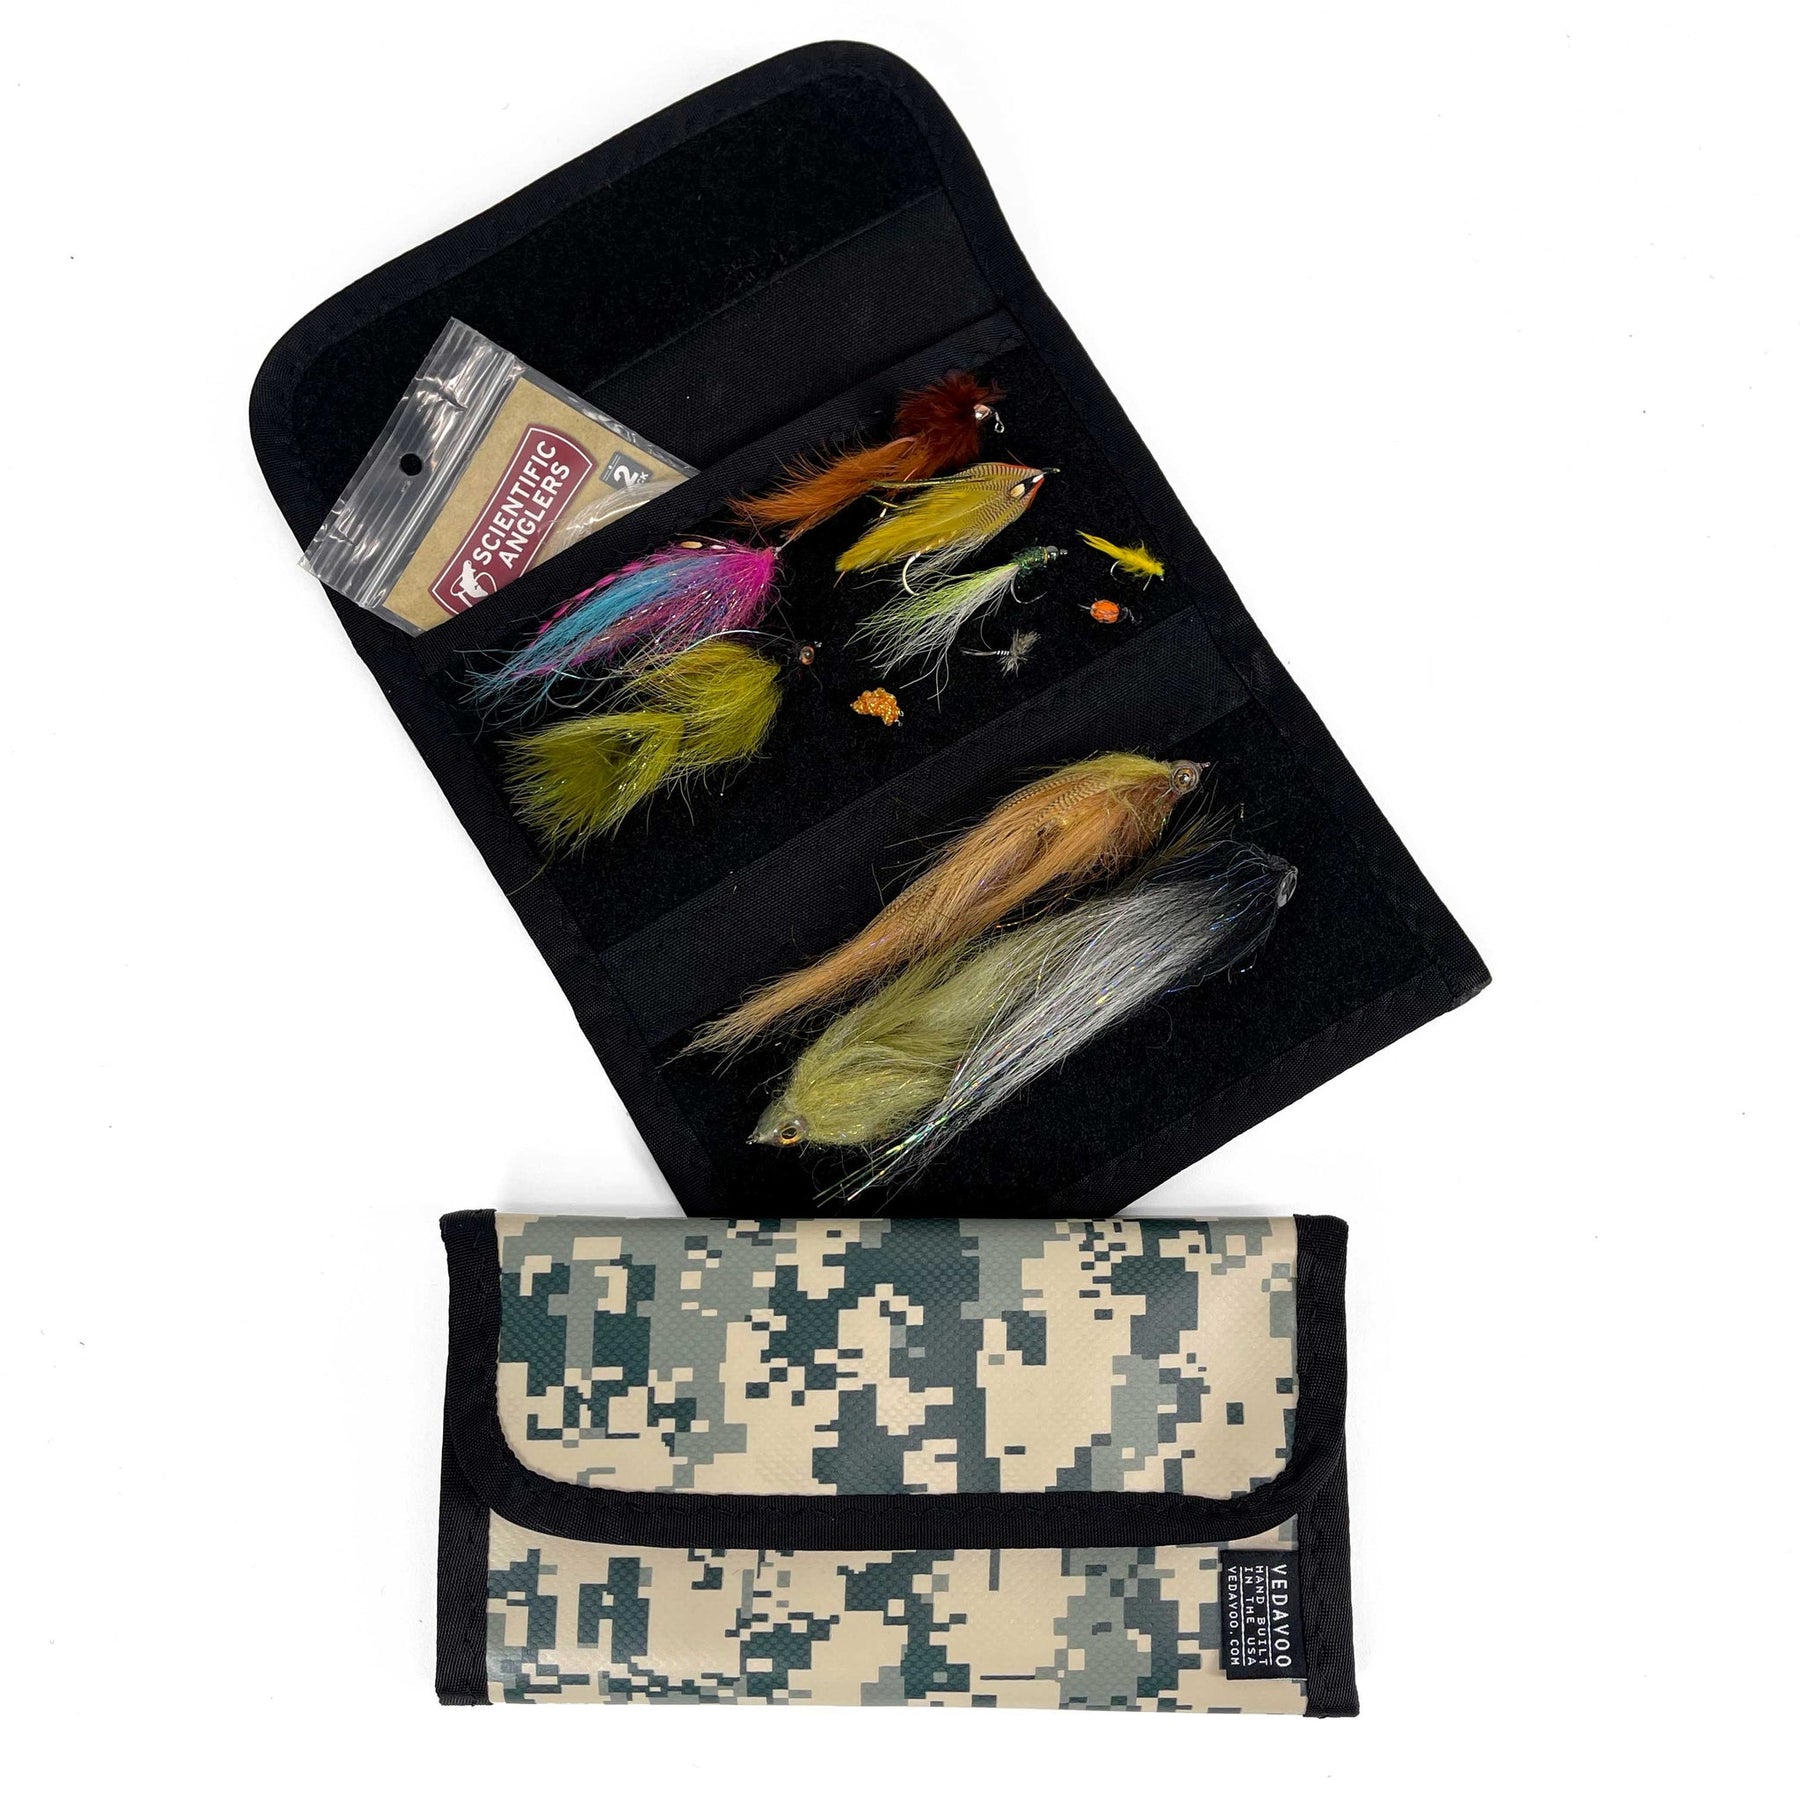 Leader Wallet Combo” 5 Leaders, Paste Floatant. Vedavoo Wallet OUT OF STOCK